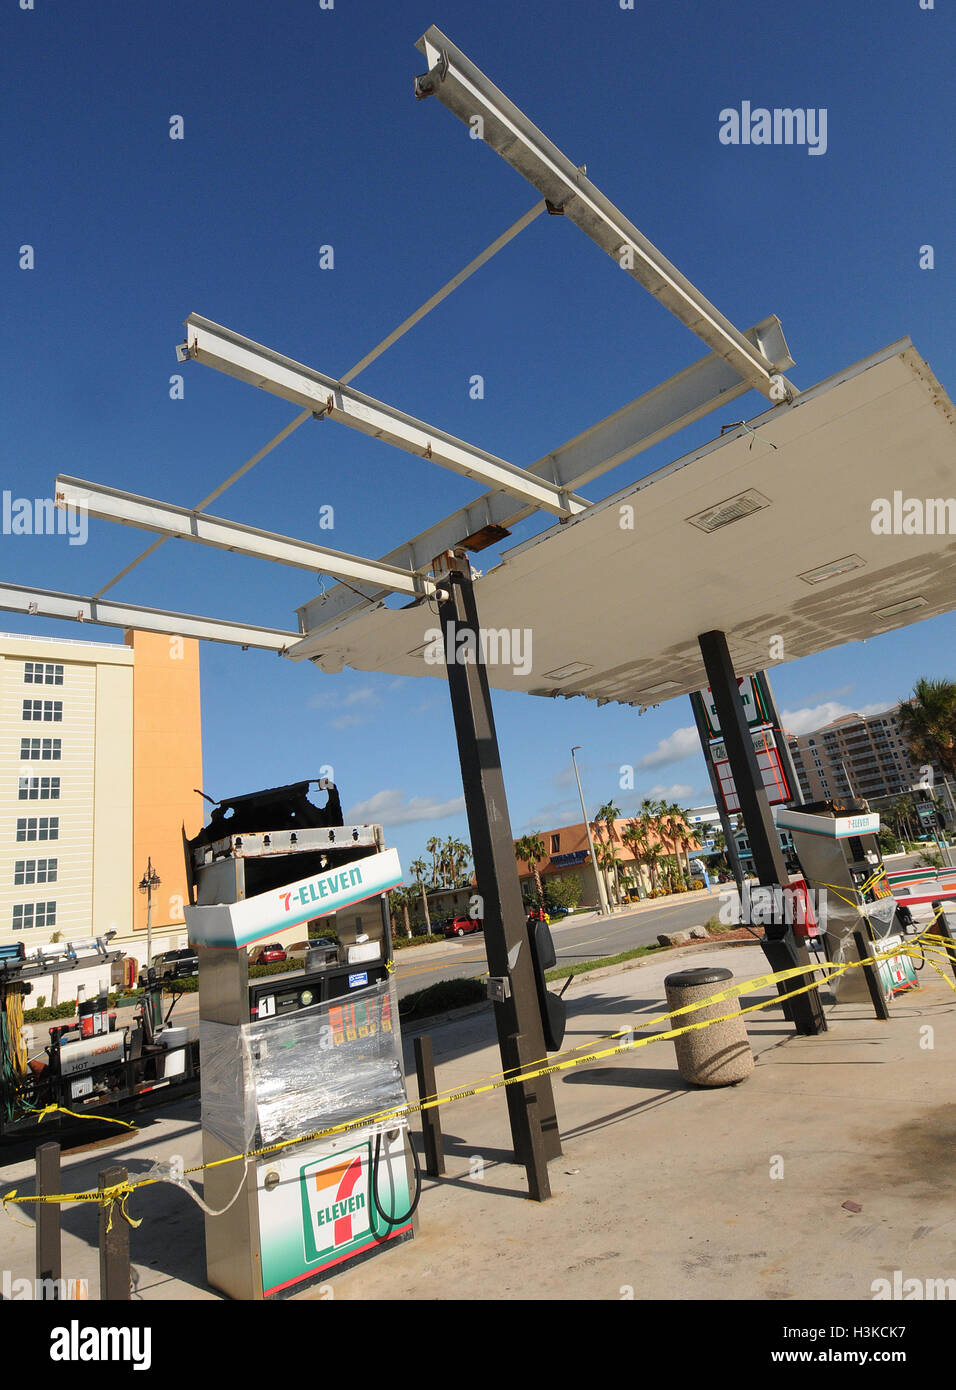 Daytona Beach, Florida, USA. 09th Oct, 2016. The damaged roof structure at a gas station is seen two days after Hurricane Matthew slammed Daytona Beach, Florida on October 7, 2016. Matthew is one of the strongest hurricanes to ever batter the U.S. coast. © Paul Hennessy/Alamy Live News Credit:  Paul Hennessy/Alamy Live News Stock Photo